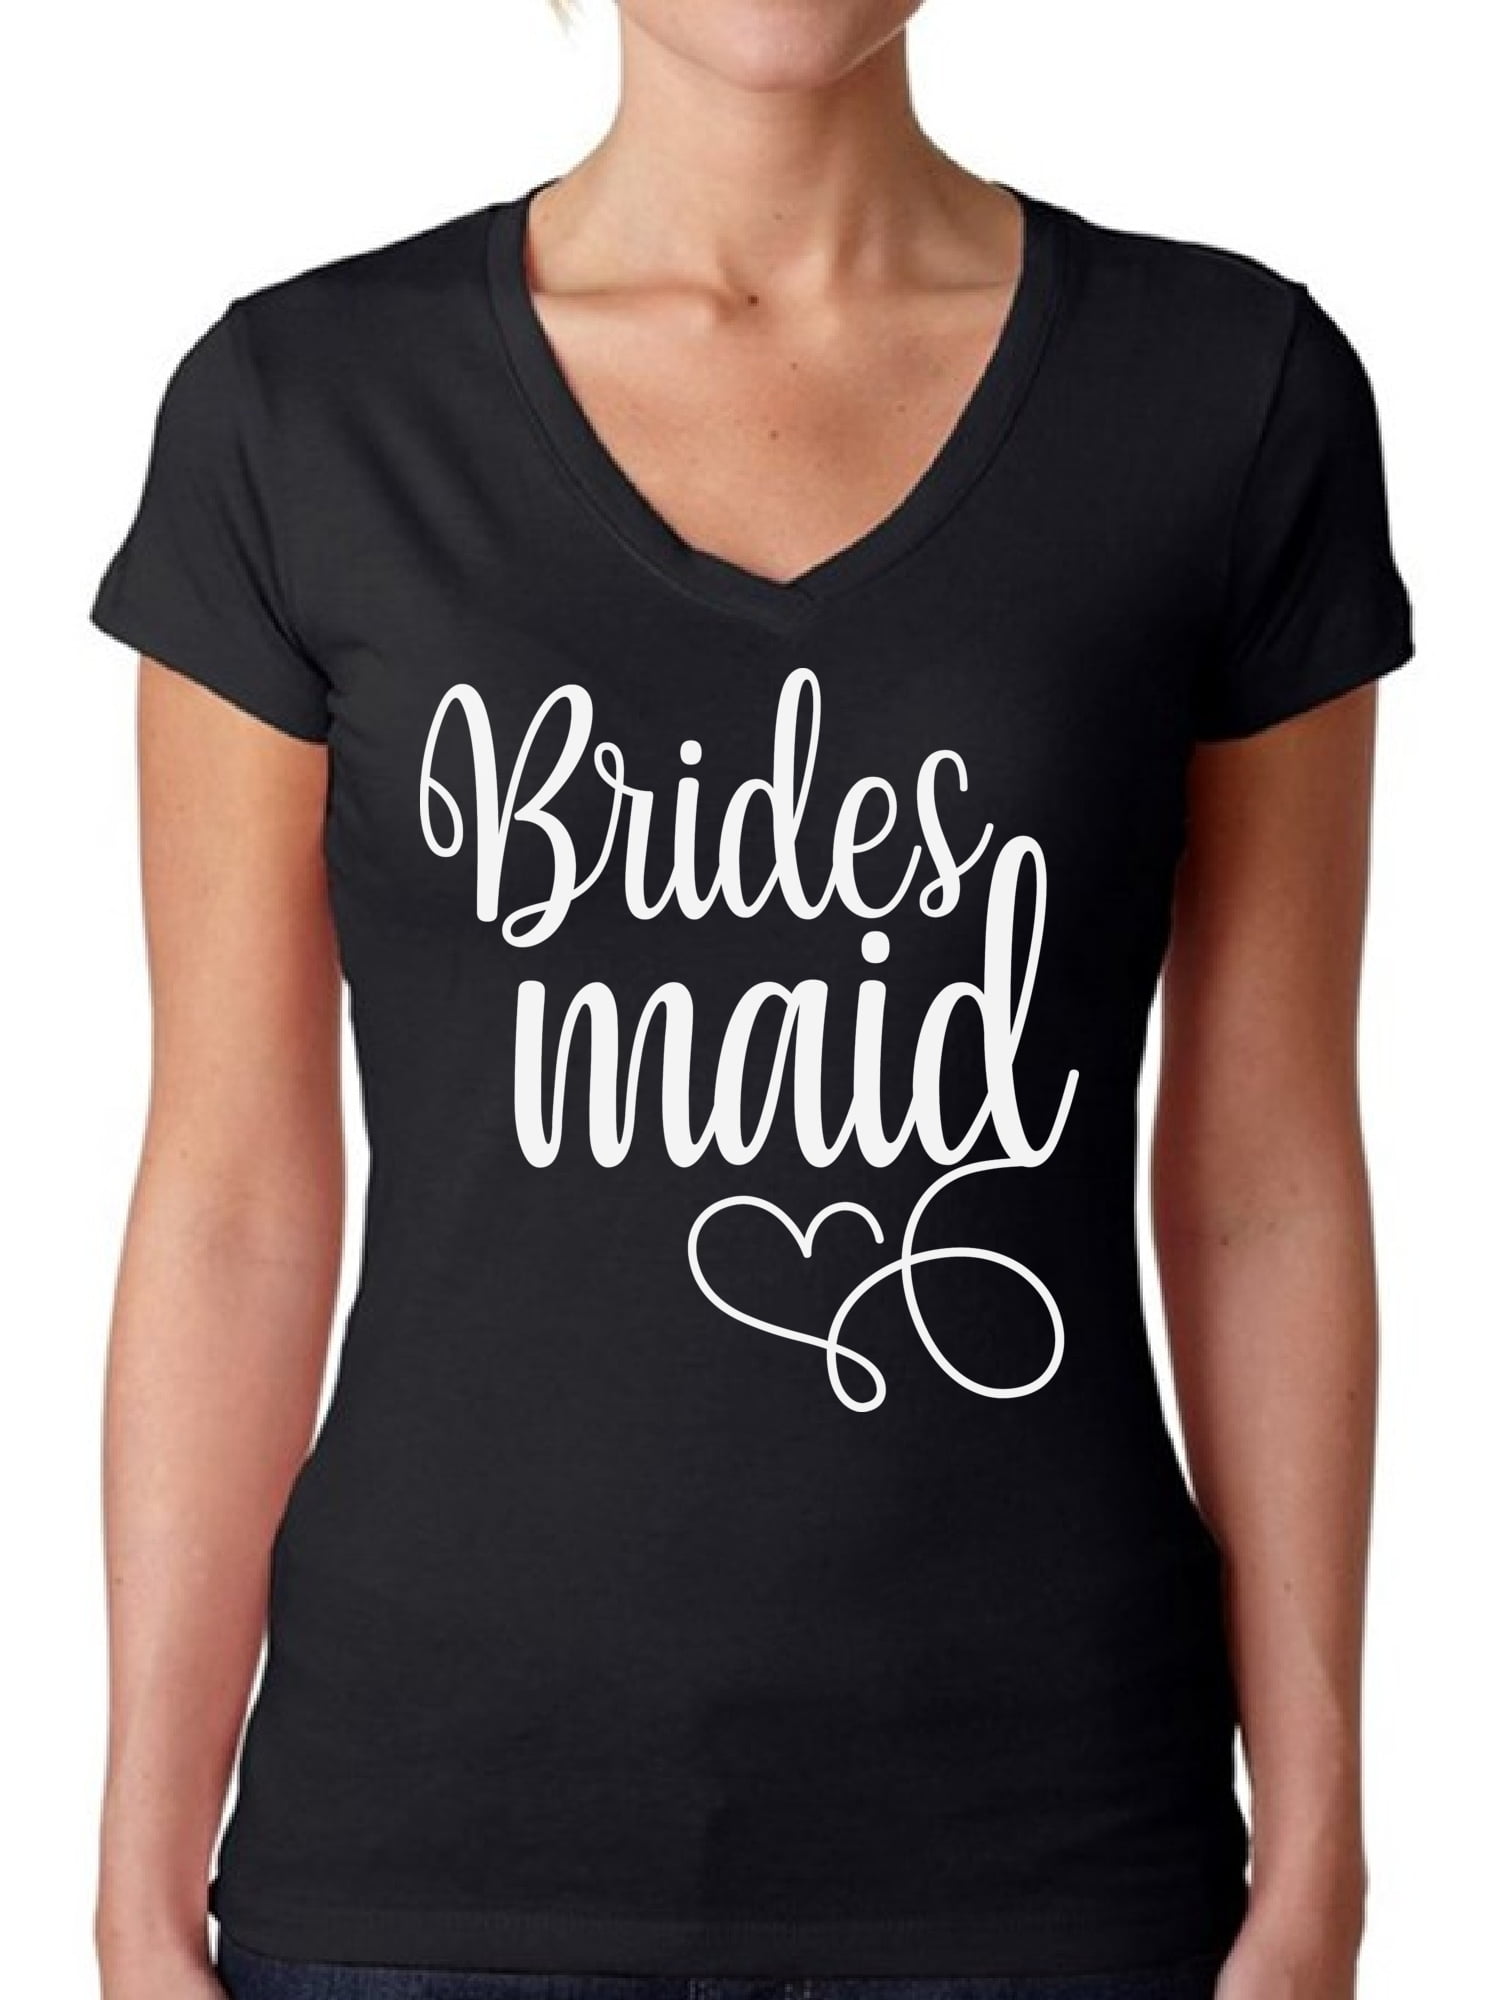 Women's V Neck T Shirt Maid of Honor Getting Ready Tshirt Wedding Day Shirt Bridal Party Gift Bride Bacehlorette Party Shirts